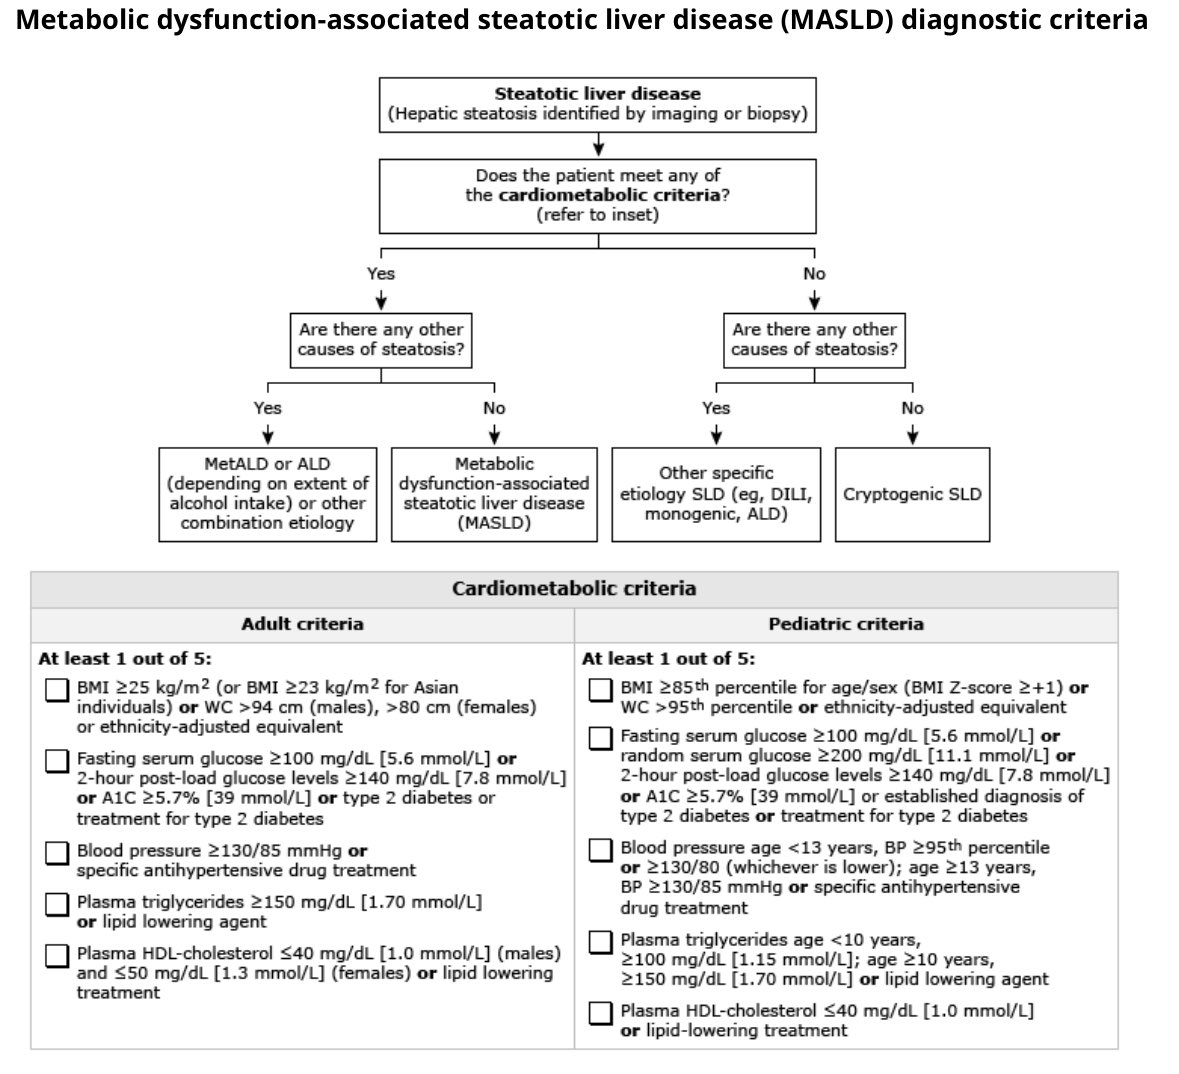 For patients with at least 1 metabolic risk factor, the diagnosis of MASLD is typically established by imaging that demonstrates liver steatosis and by excluding other primary etiologies for liver disease.
#ERICKMD24Diabetes #ERICKMD24MetabolicSyndrome